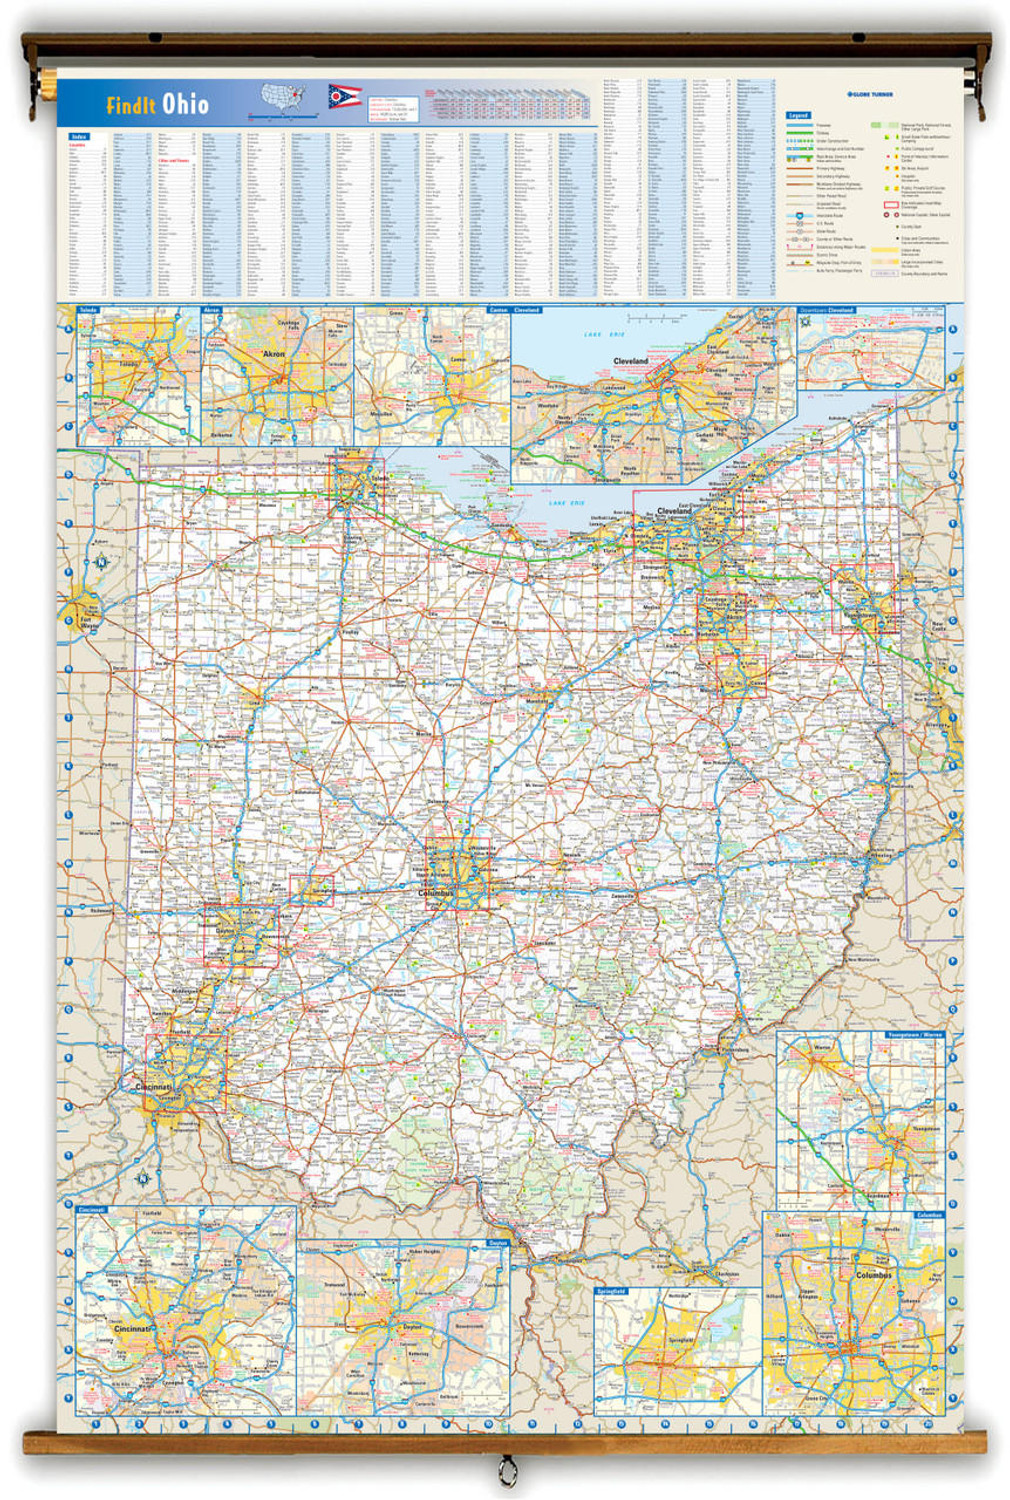 Ohio Reference Pull-Down Map, image 1, World Maps Online